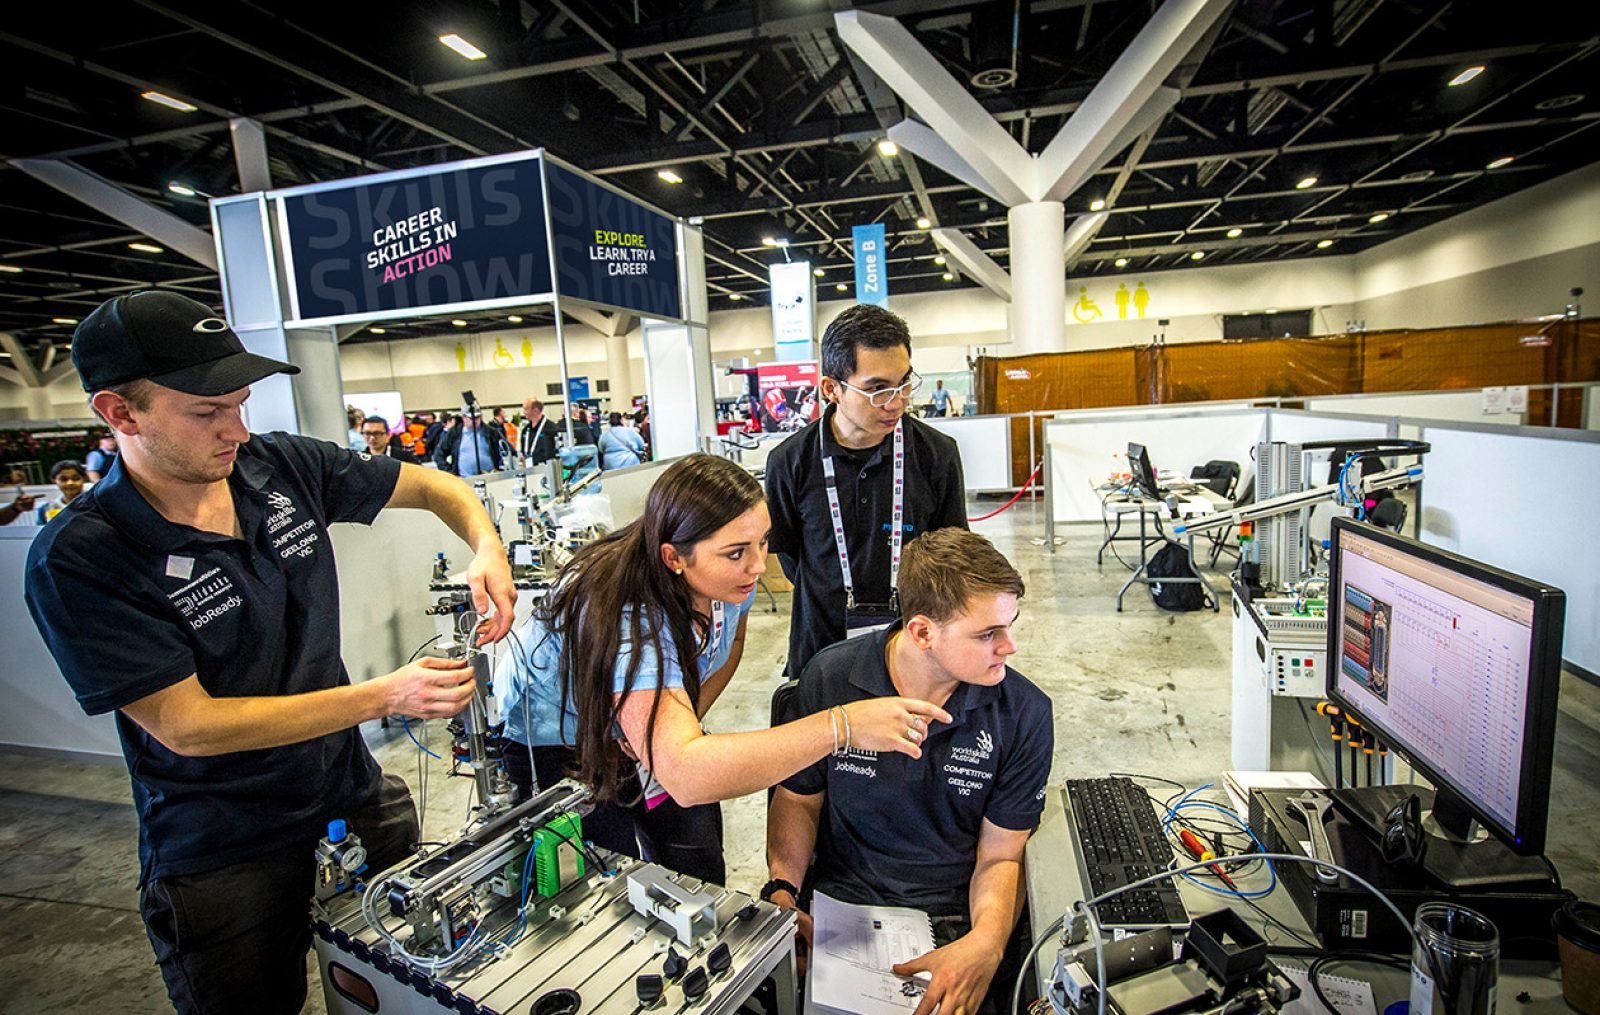 Skills Show Australia National Championships competitors in a large exhibition space